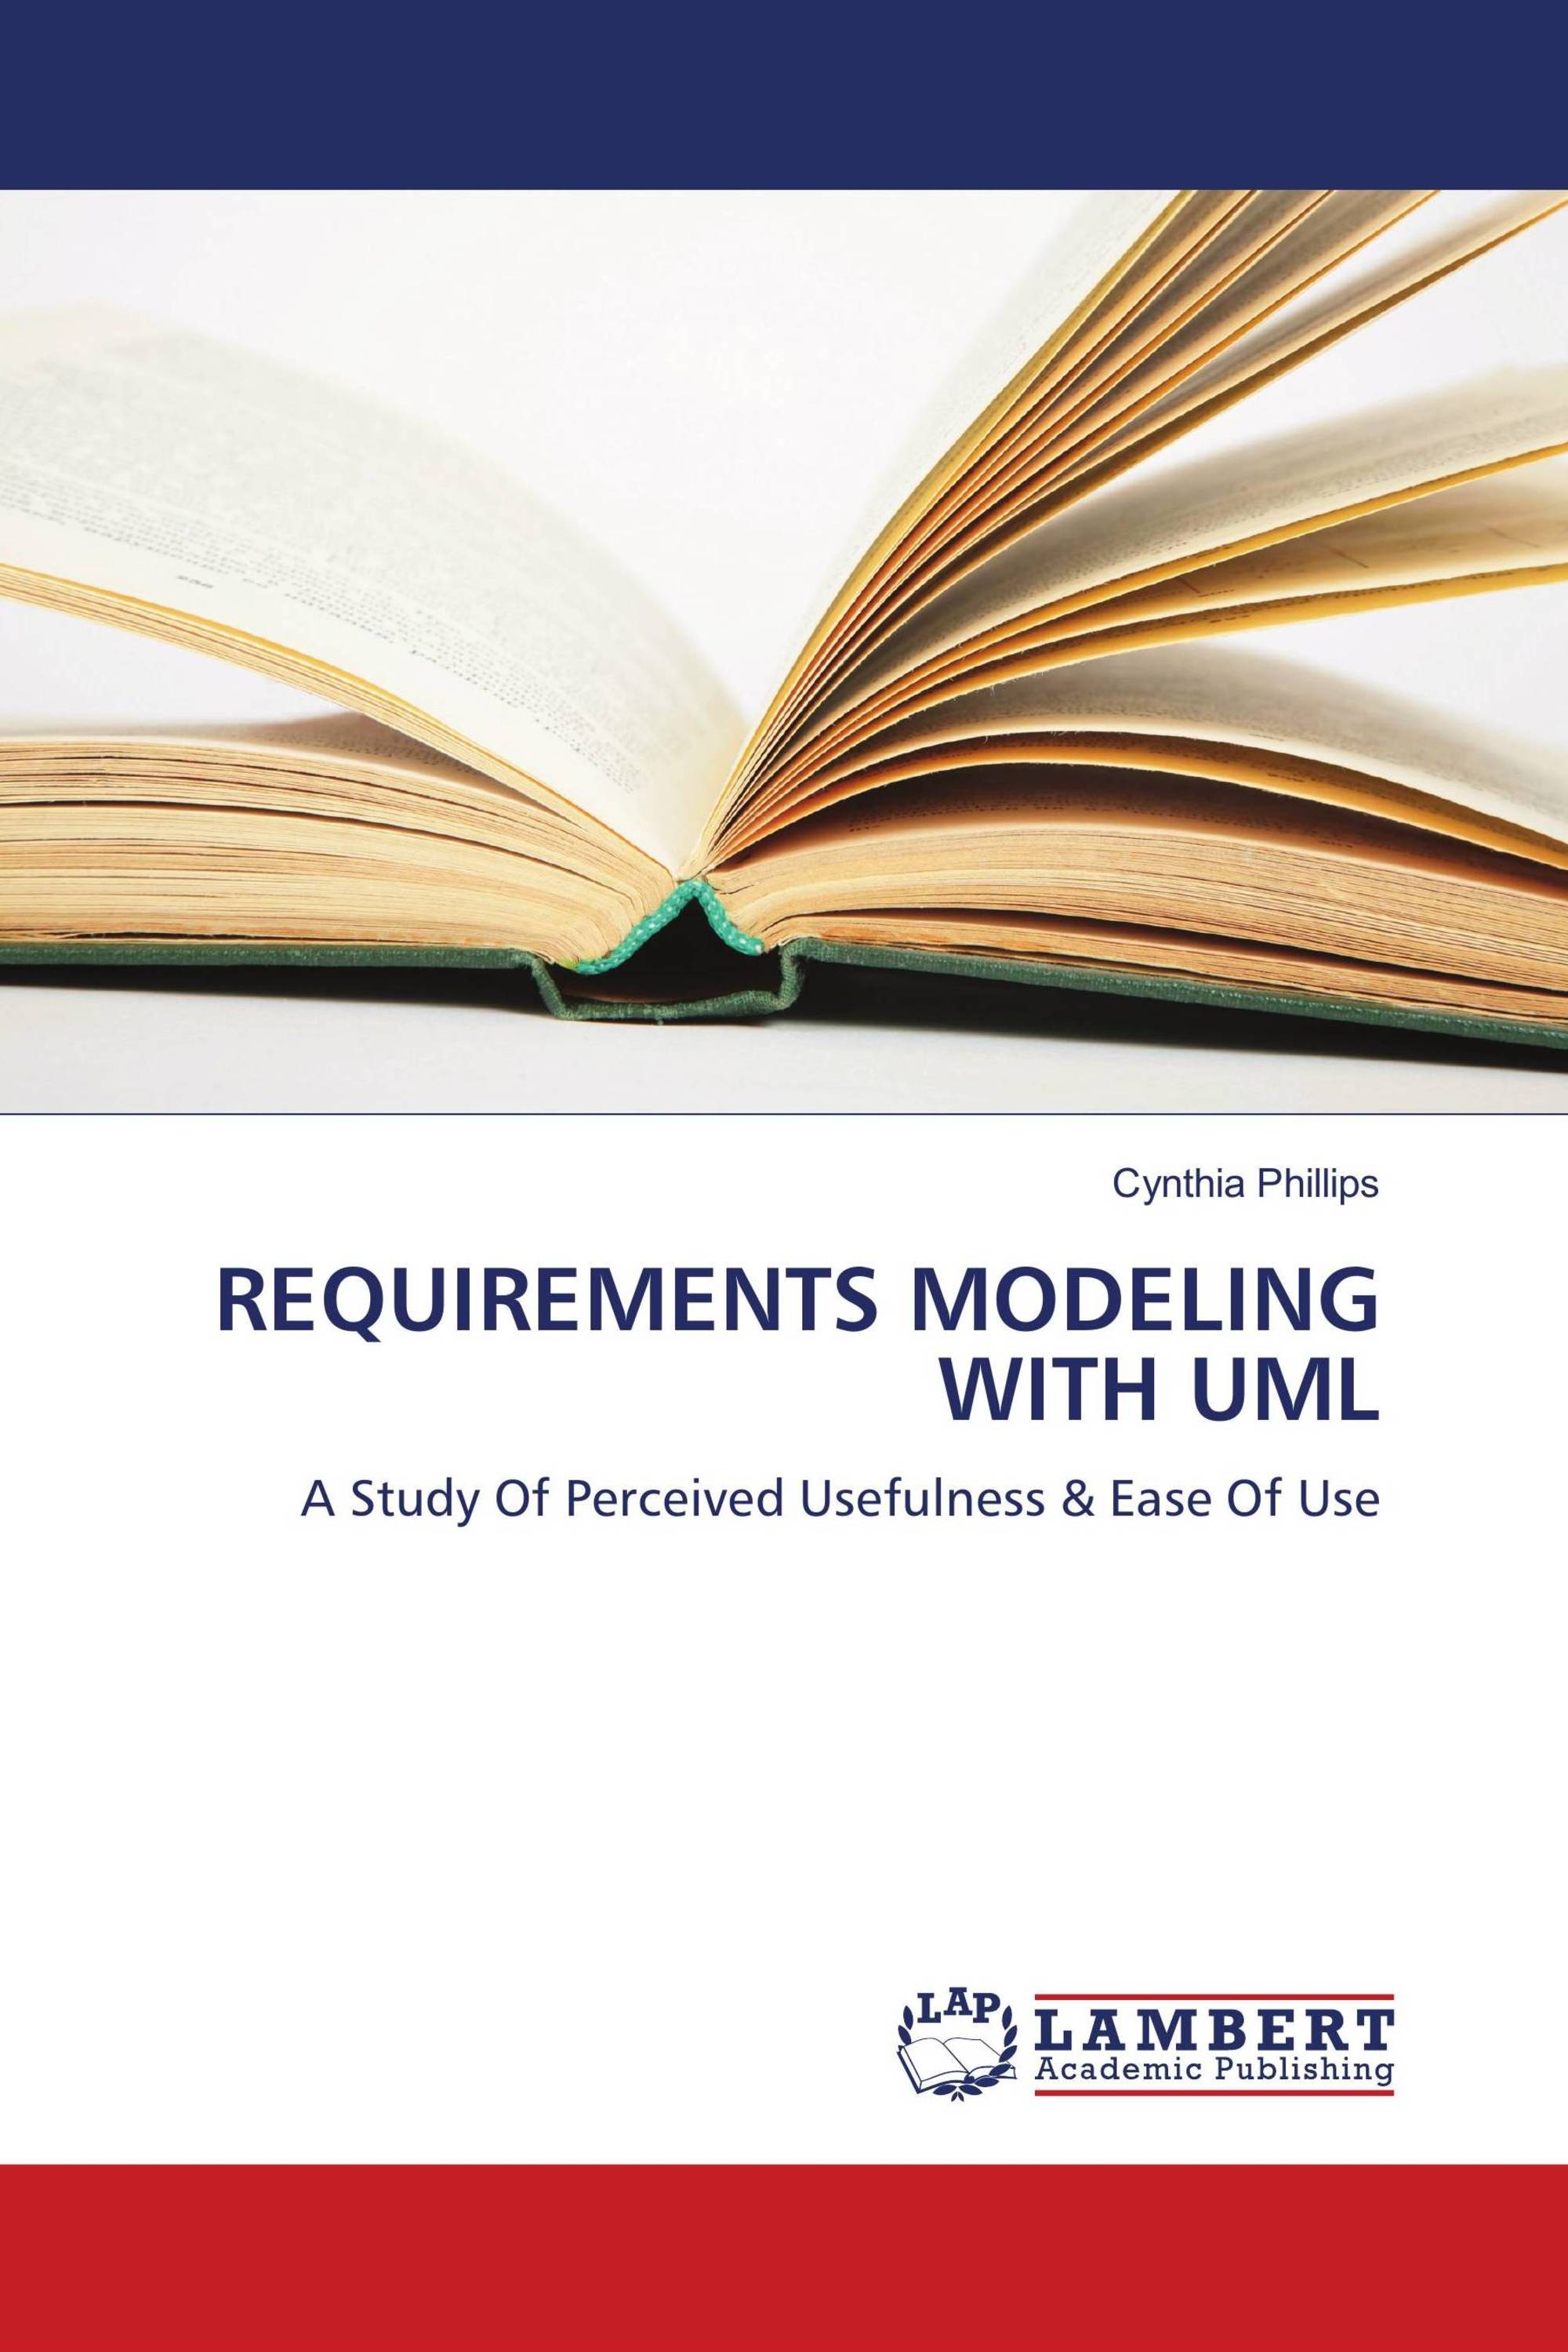 REQUIREMENTS MODELING WITH UML